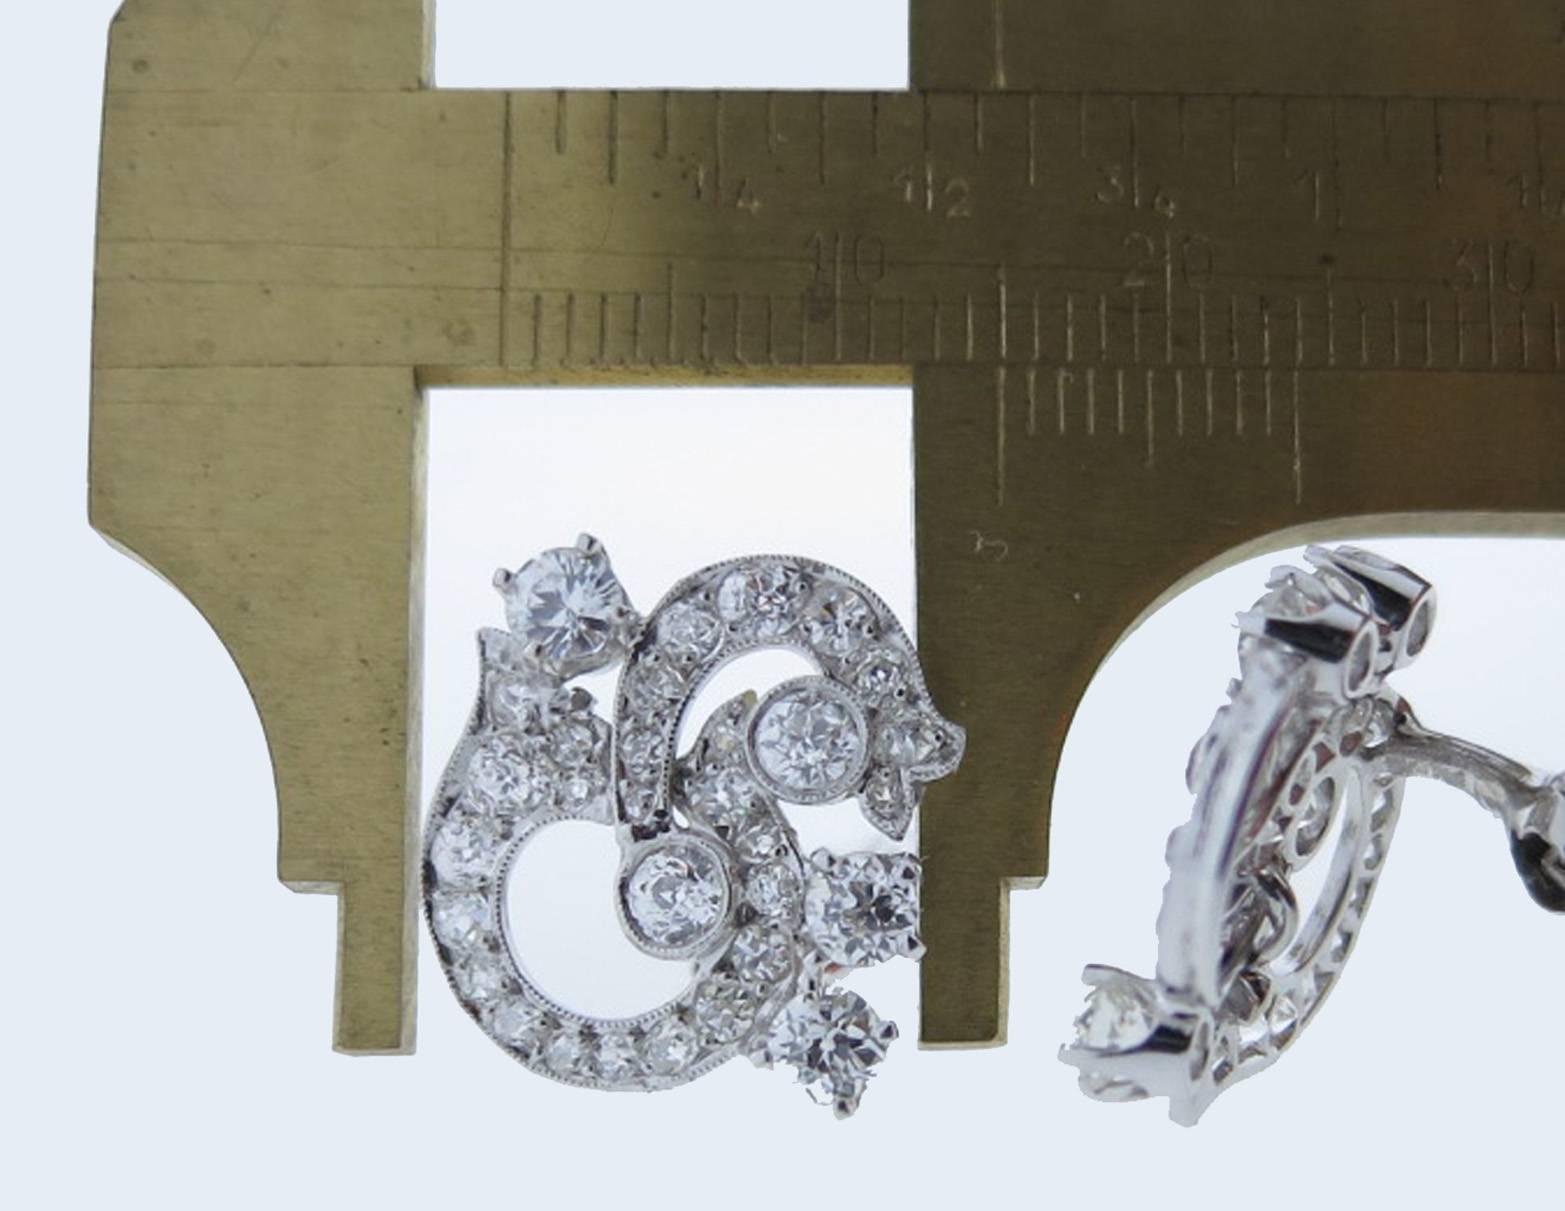 Handmade opposing swirl design platinum mount diamond earrings. Each earring measures approx .75 inches in length and is bezel and prong set with five old mine cut diamonds totaling approx .40cts. The surrounding mount is bead set with 25 old mine